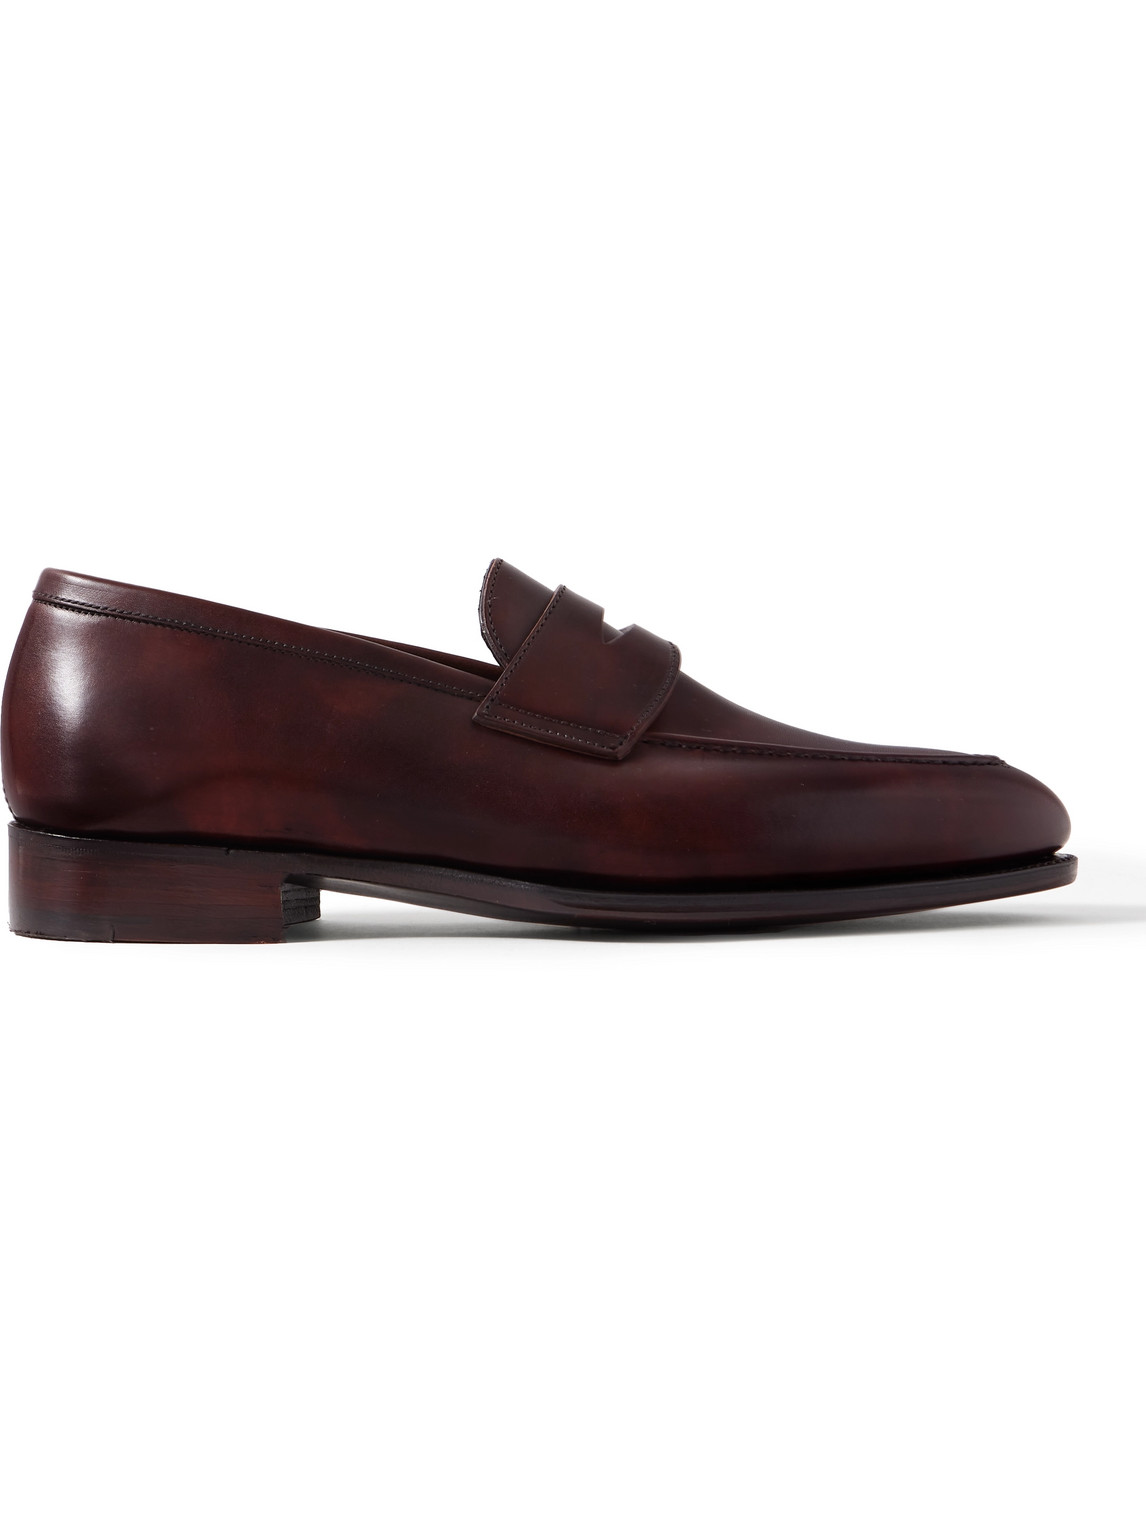 George Cleverley Bradley II Leather Penny Loafers Men Brown UK  for Men